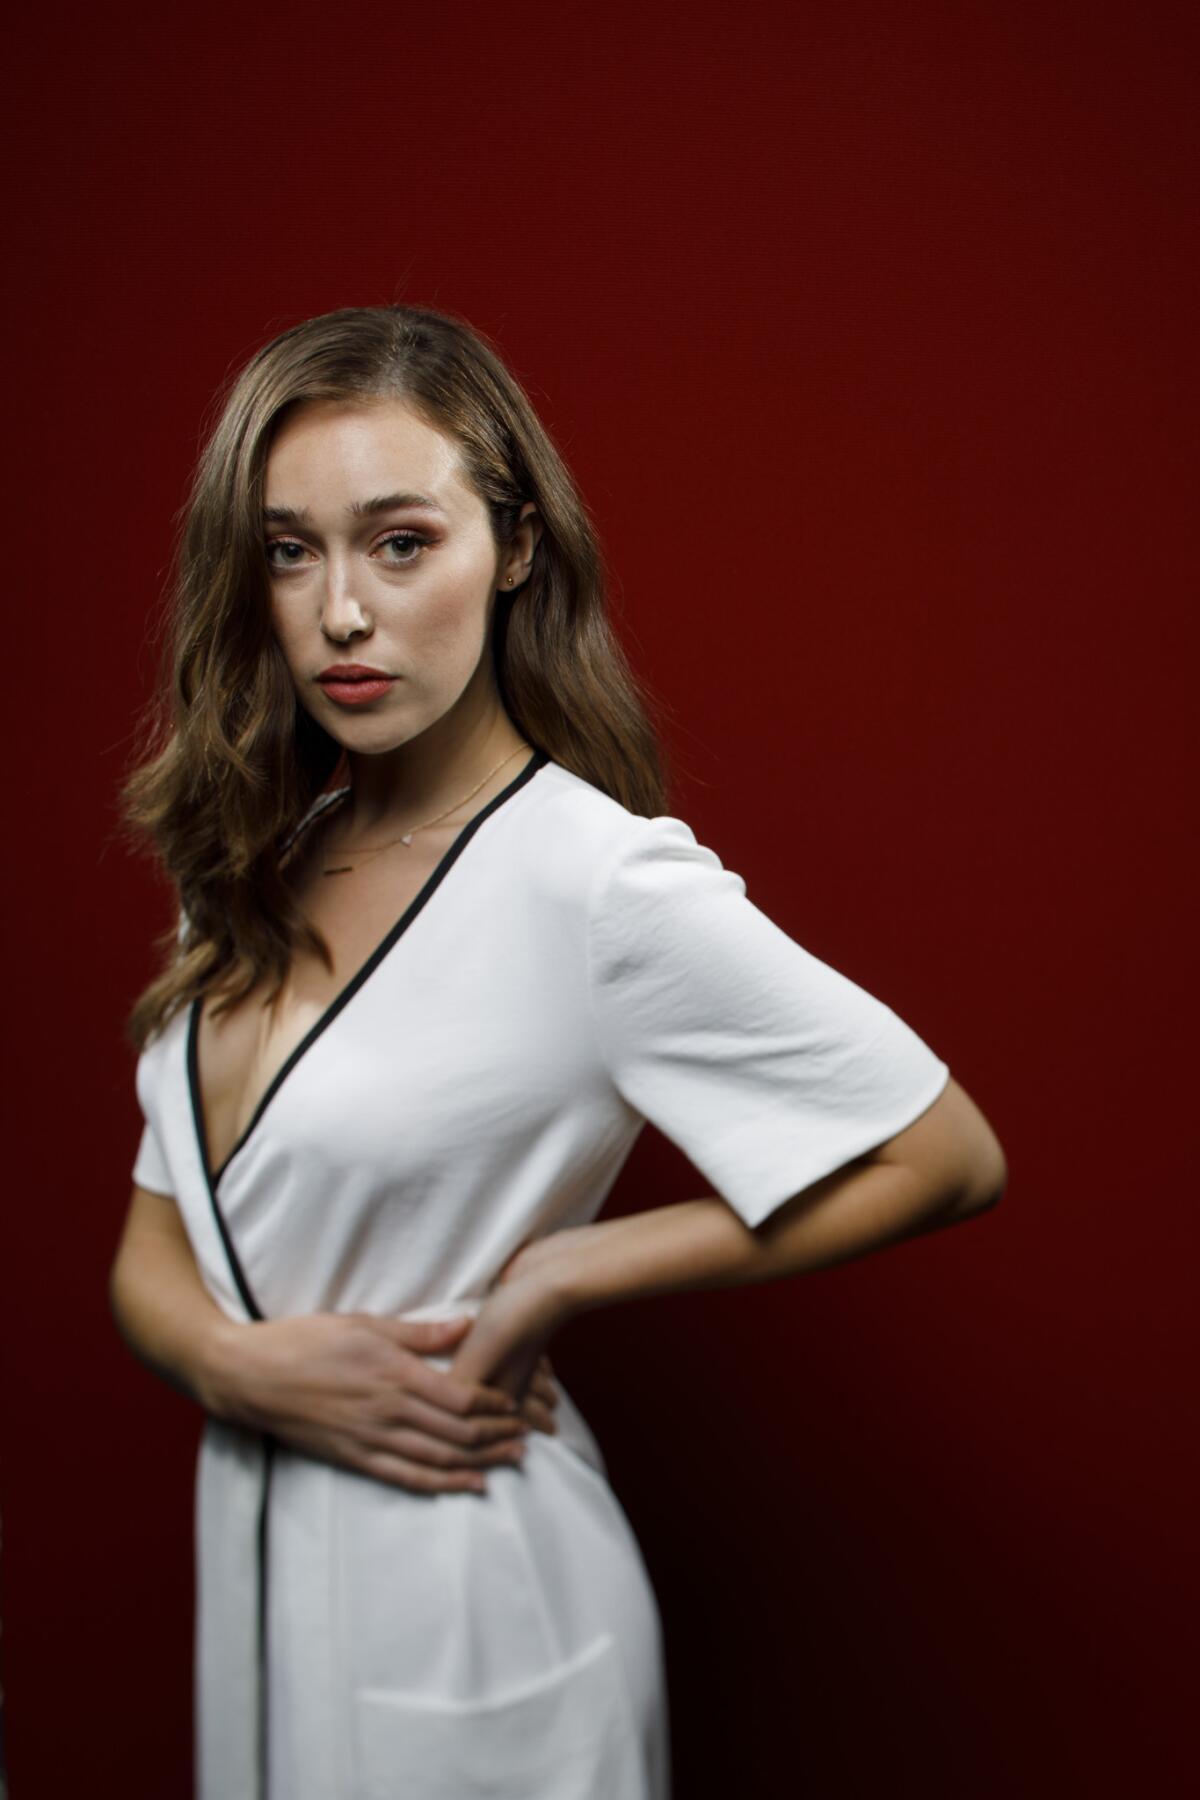 Alycia Debnam-Carey from the television series "Fear the Walking Dead."